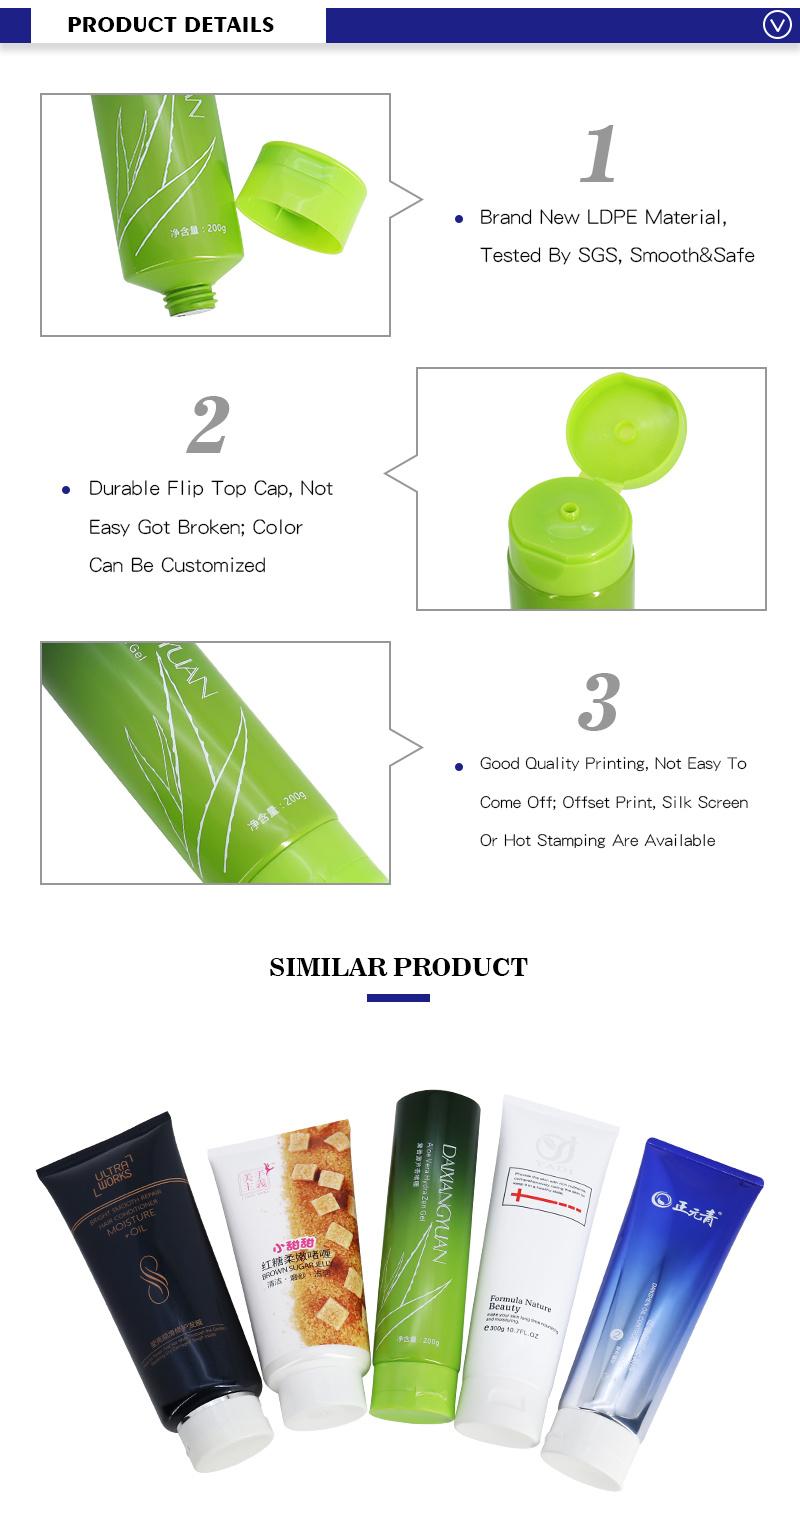 200g Green Custom Packaging Plastic Squeeze Lotion Tube for Body Care